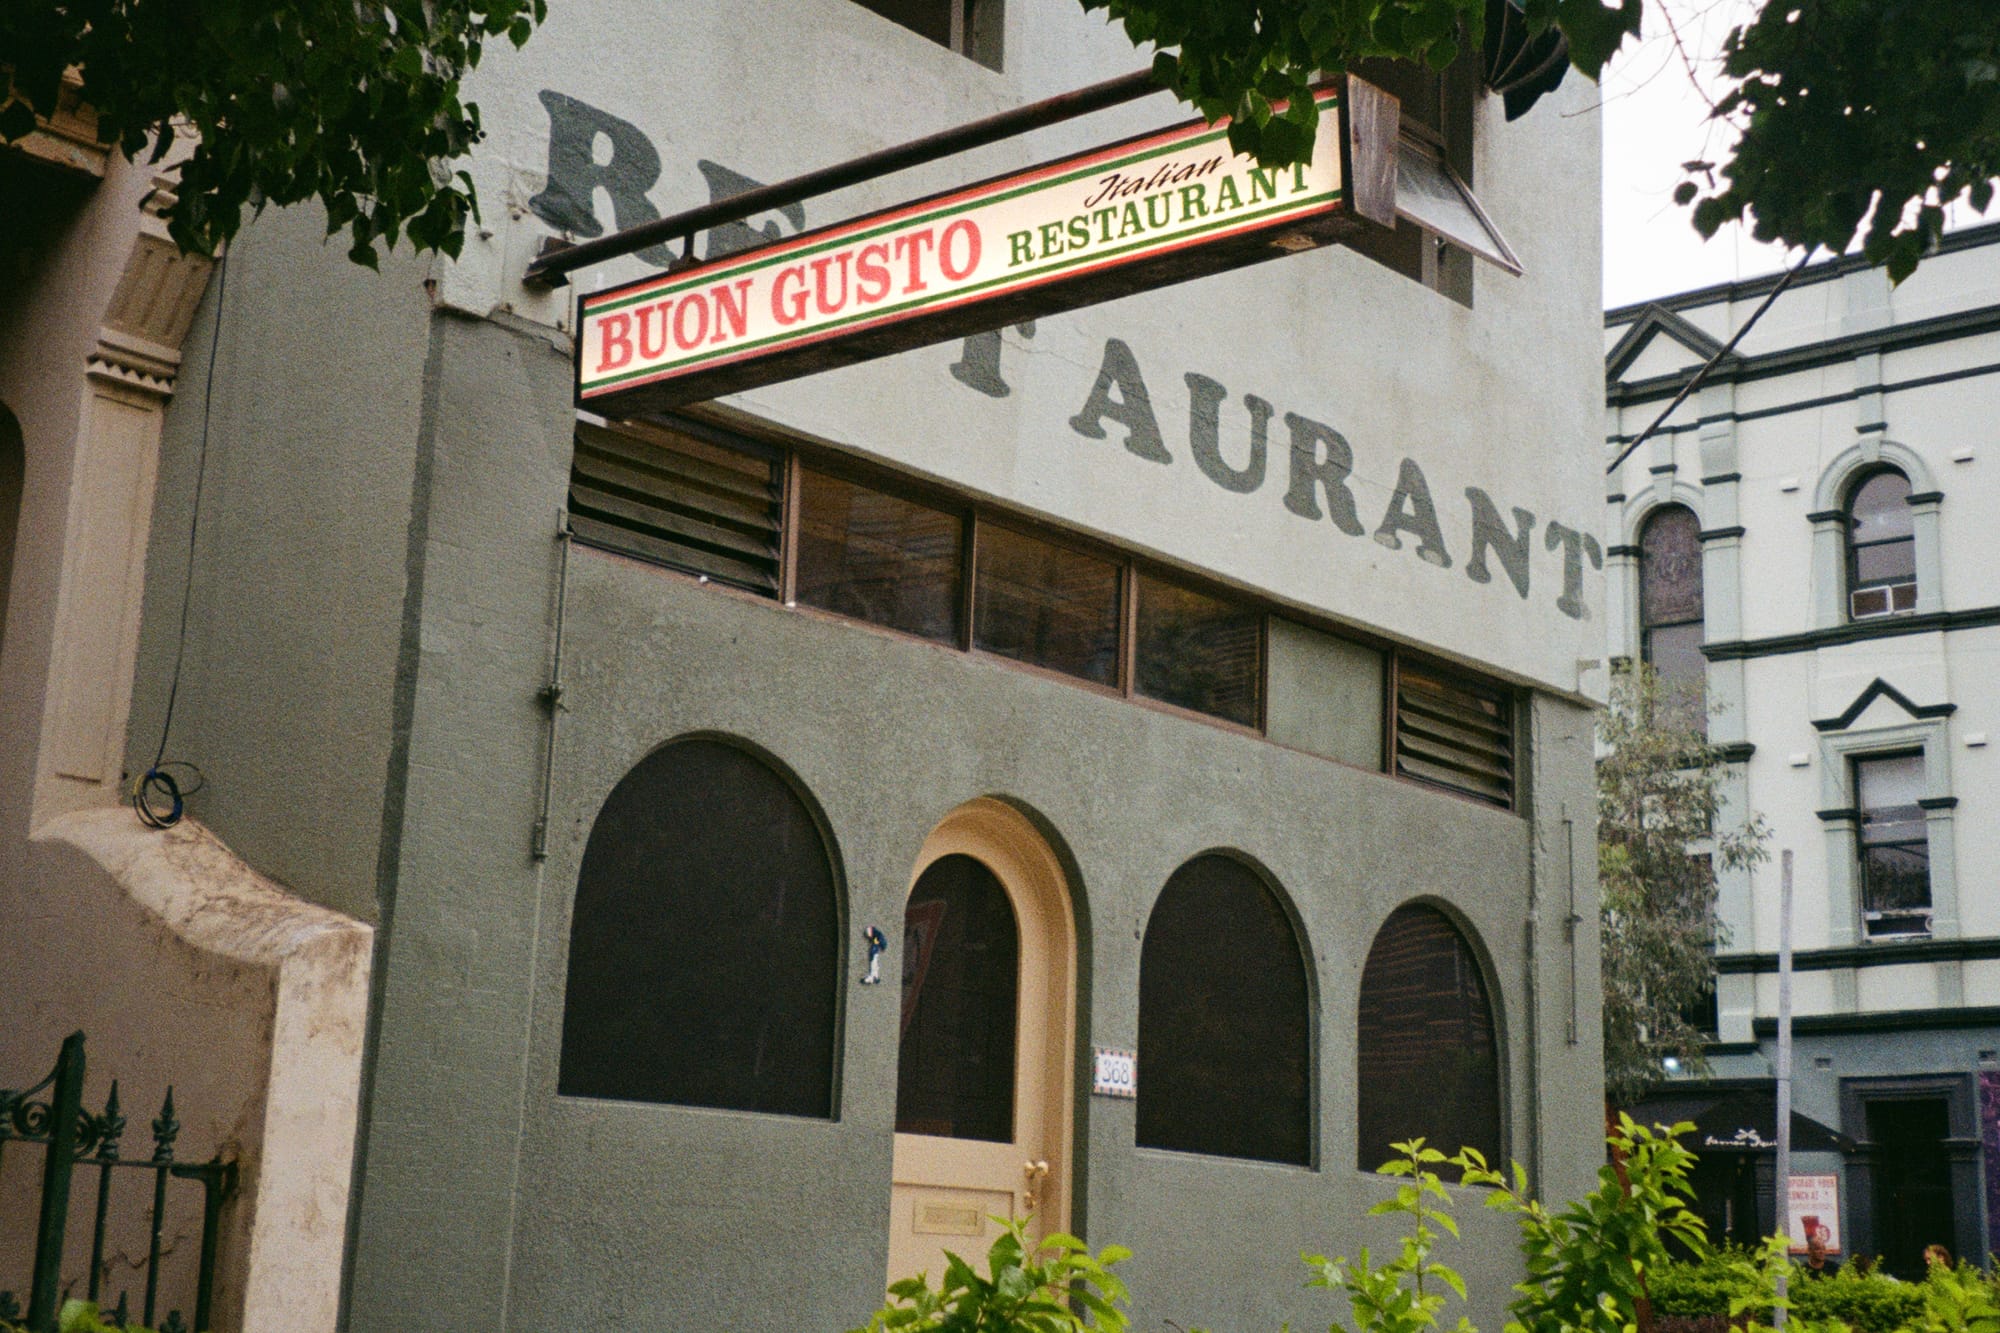 Buon Gusto. Photography by Benjamin Jay Shand. Facade of double storey building with arched door and windows. Italian restaurant sign hanging off wall. Dark green exterior.